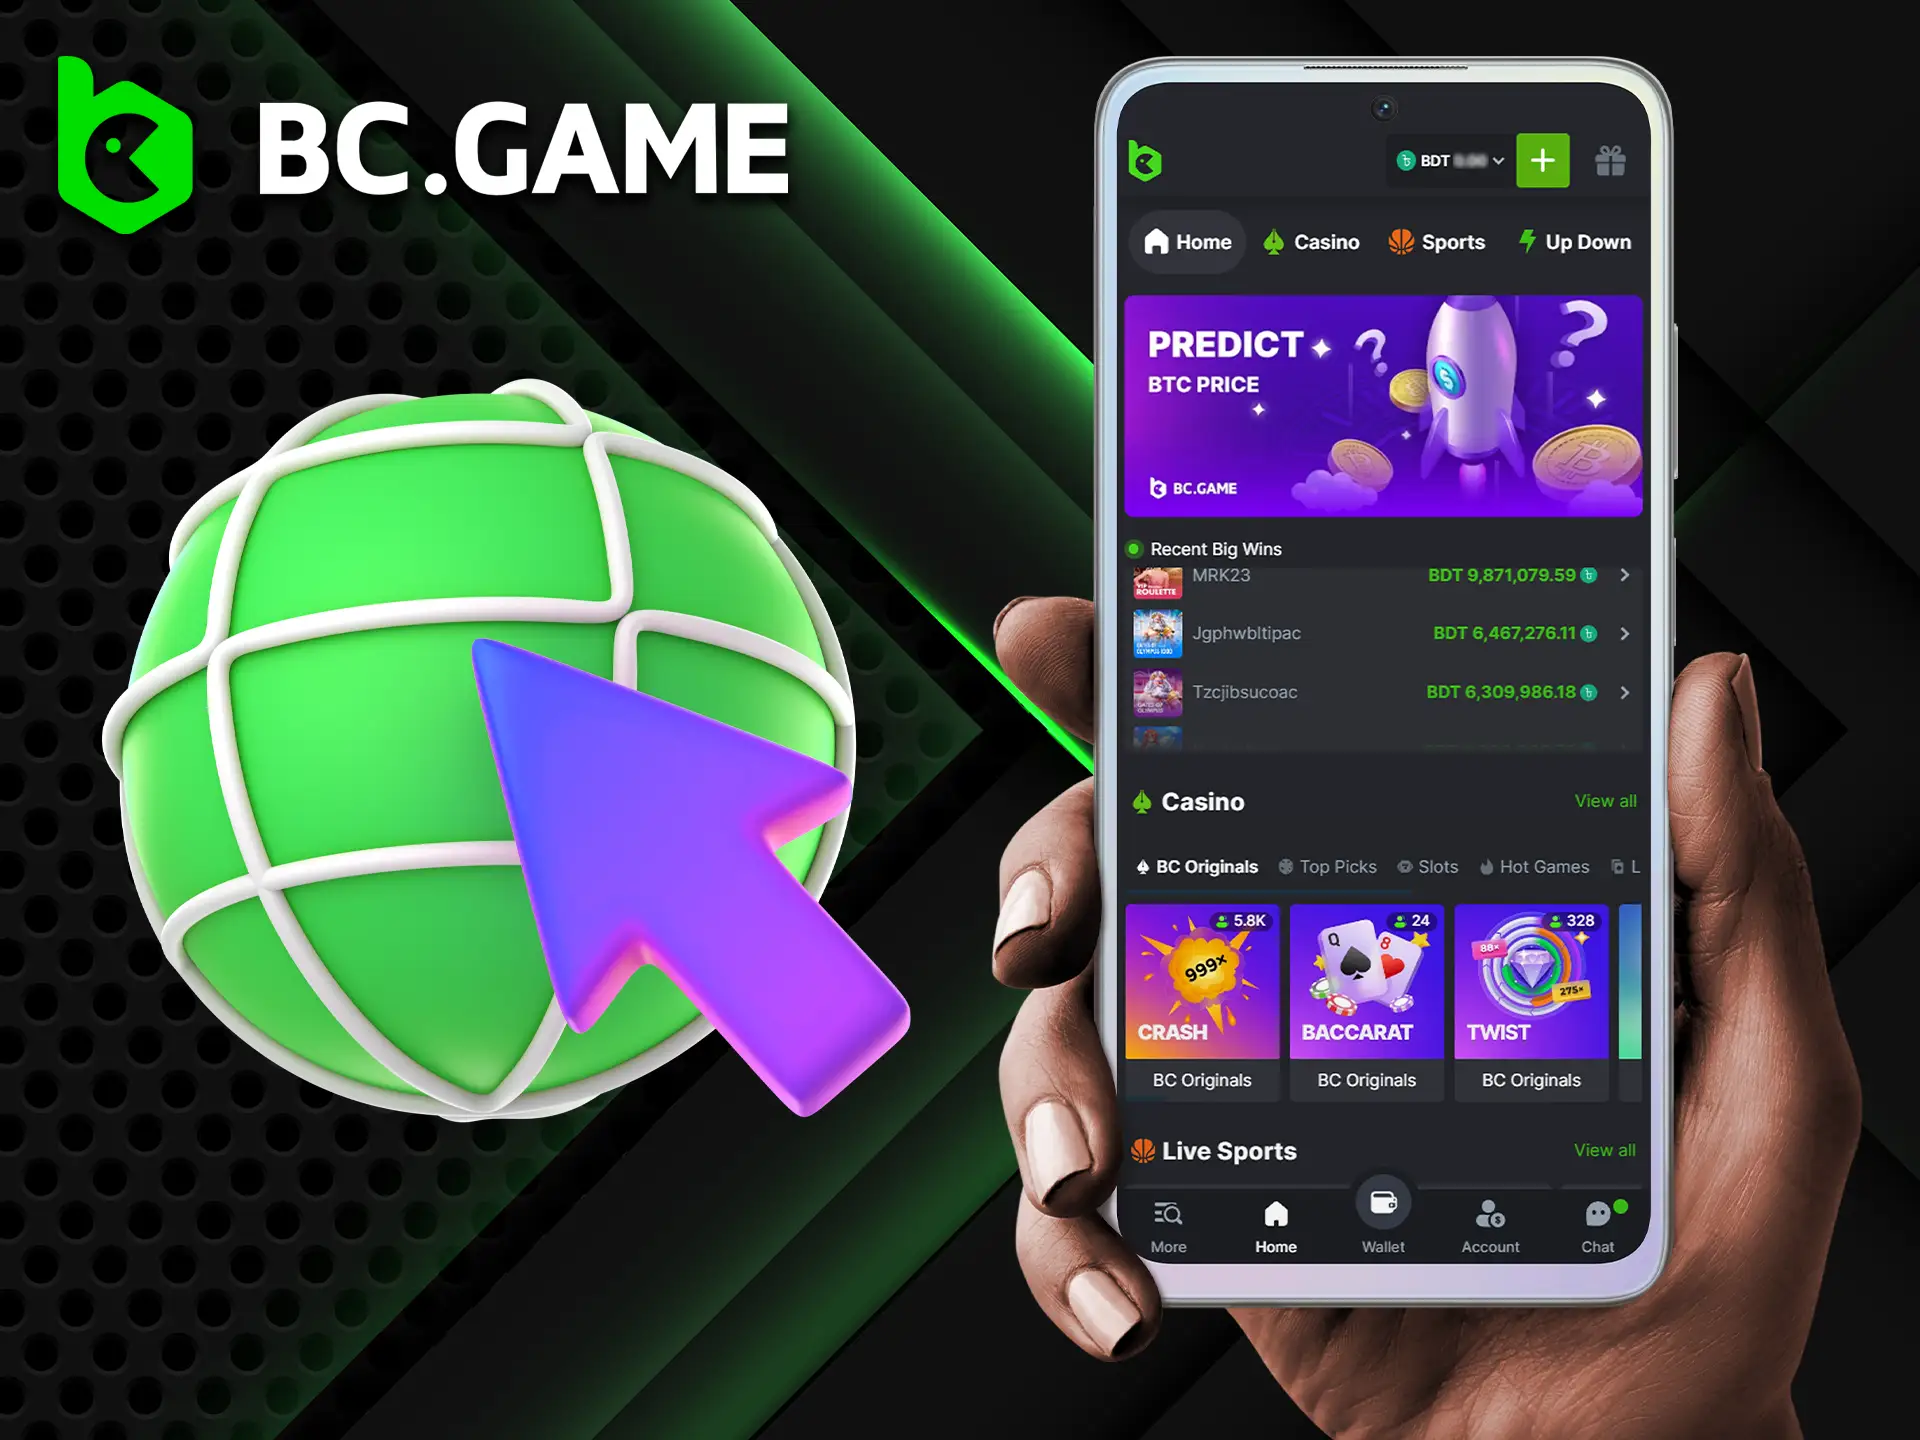 The mobile version of BC GAME has several features.